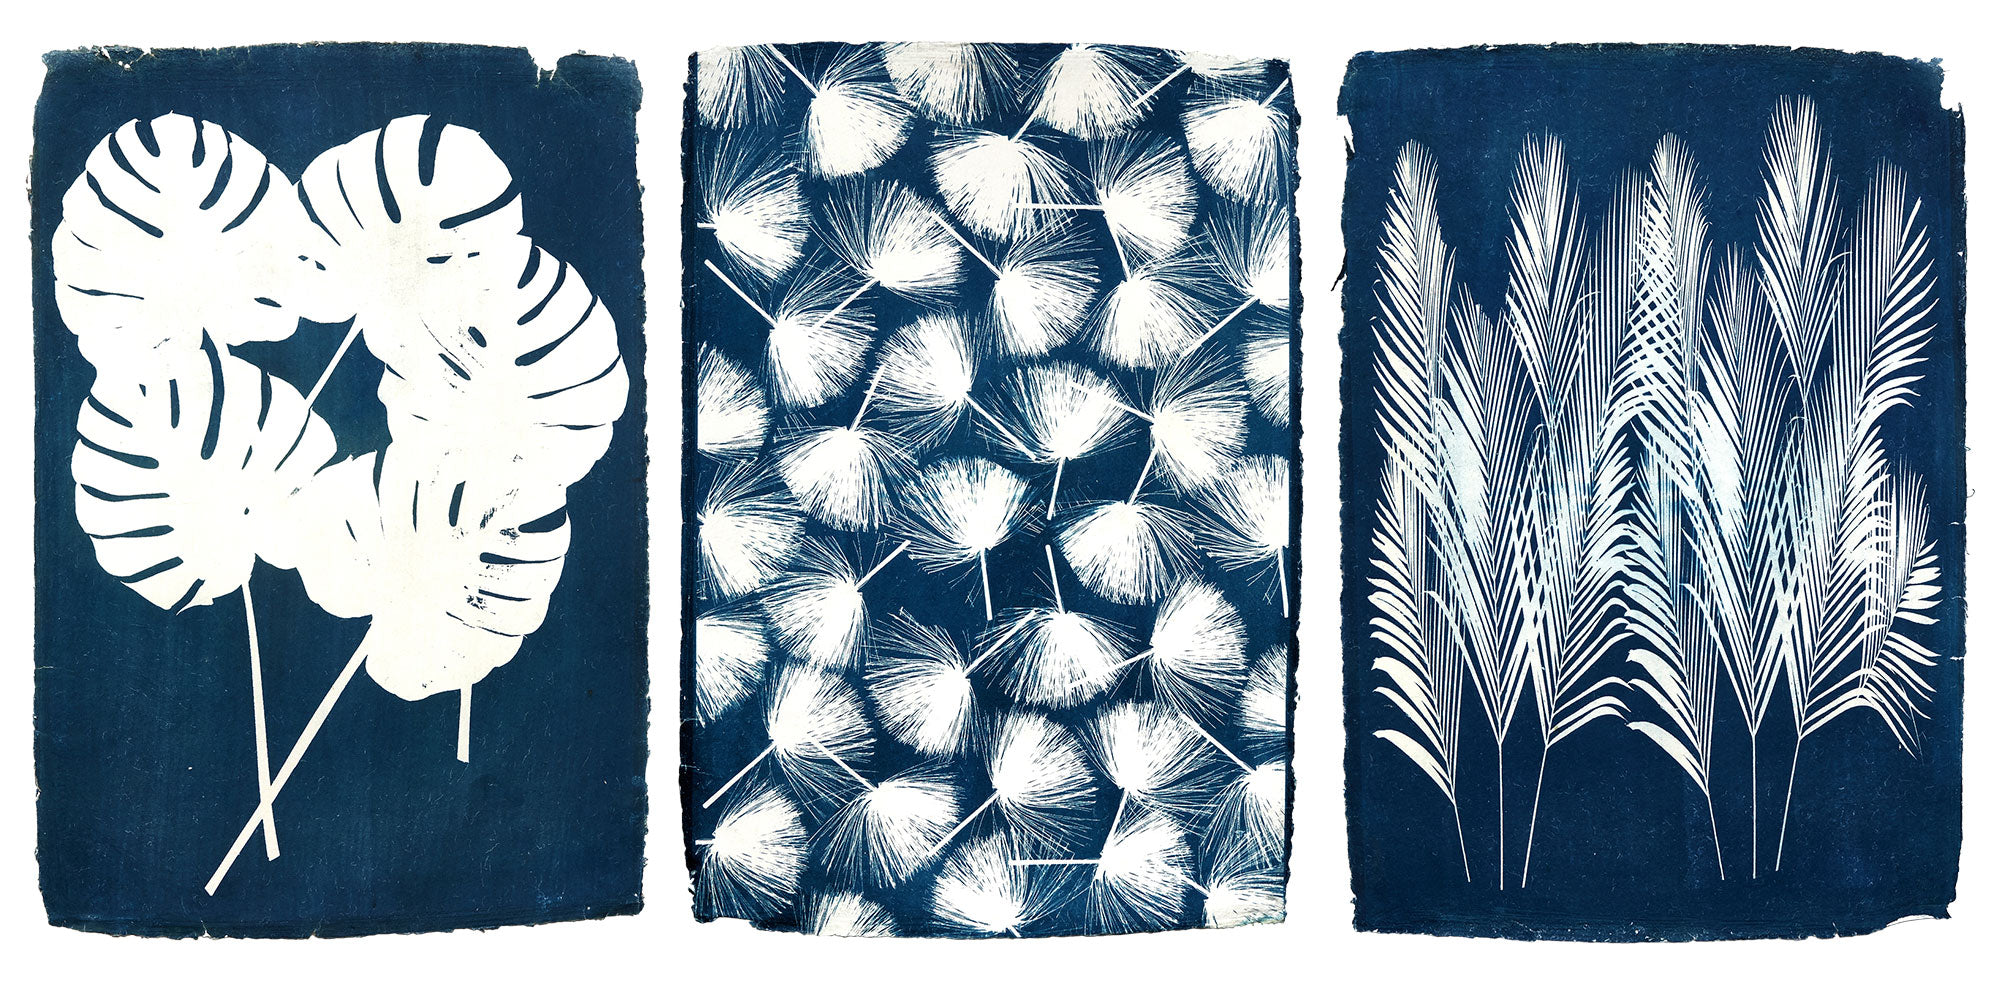 Historical Processes: The Cyanotype